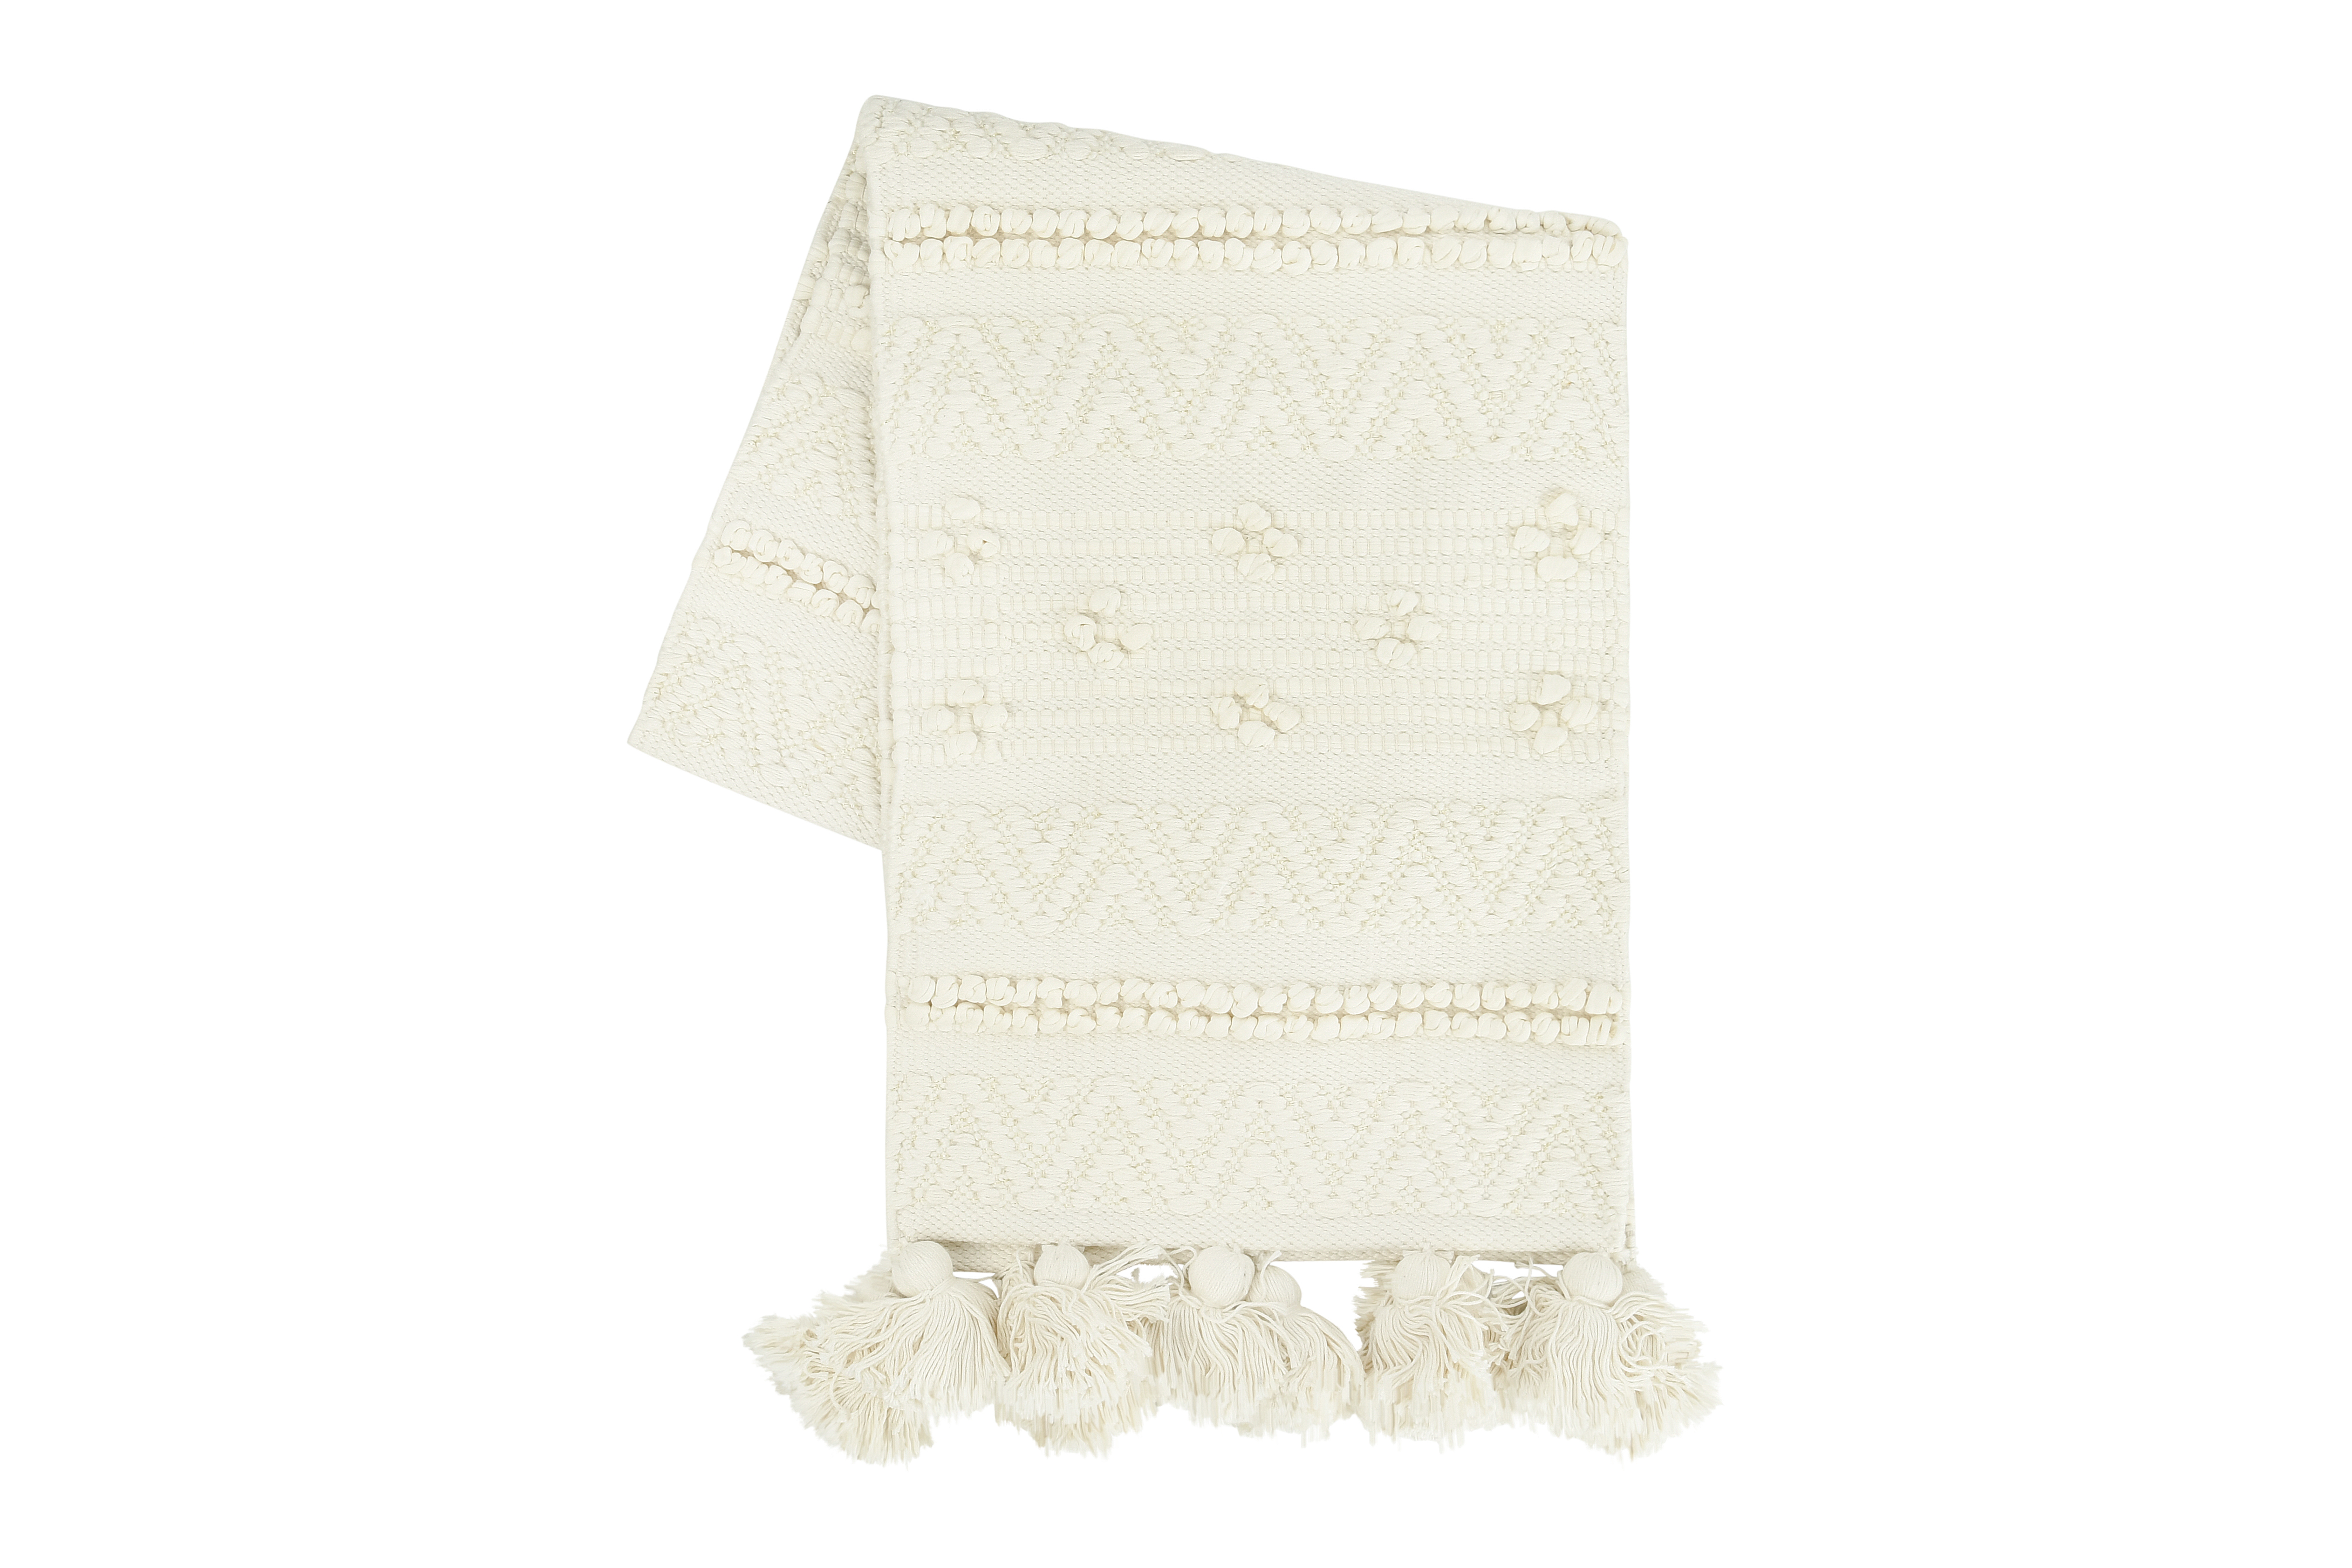 72" Woven Cotton Textured Table Runner with Pom Poms & Tassels - Nomad Home